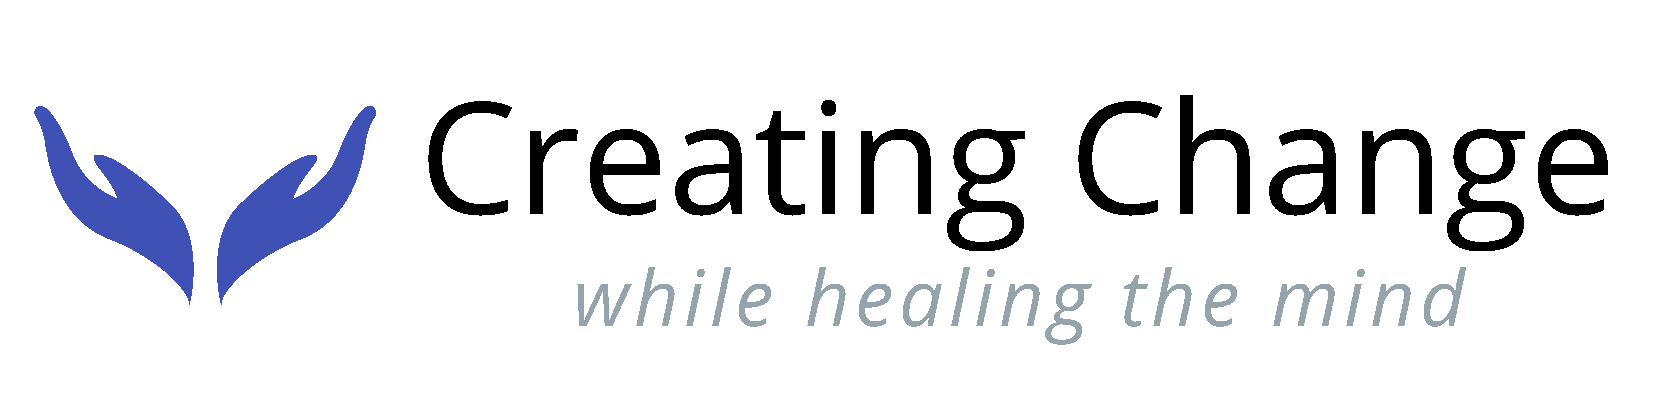 Creating Change while healing the mind